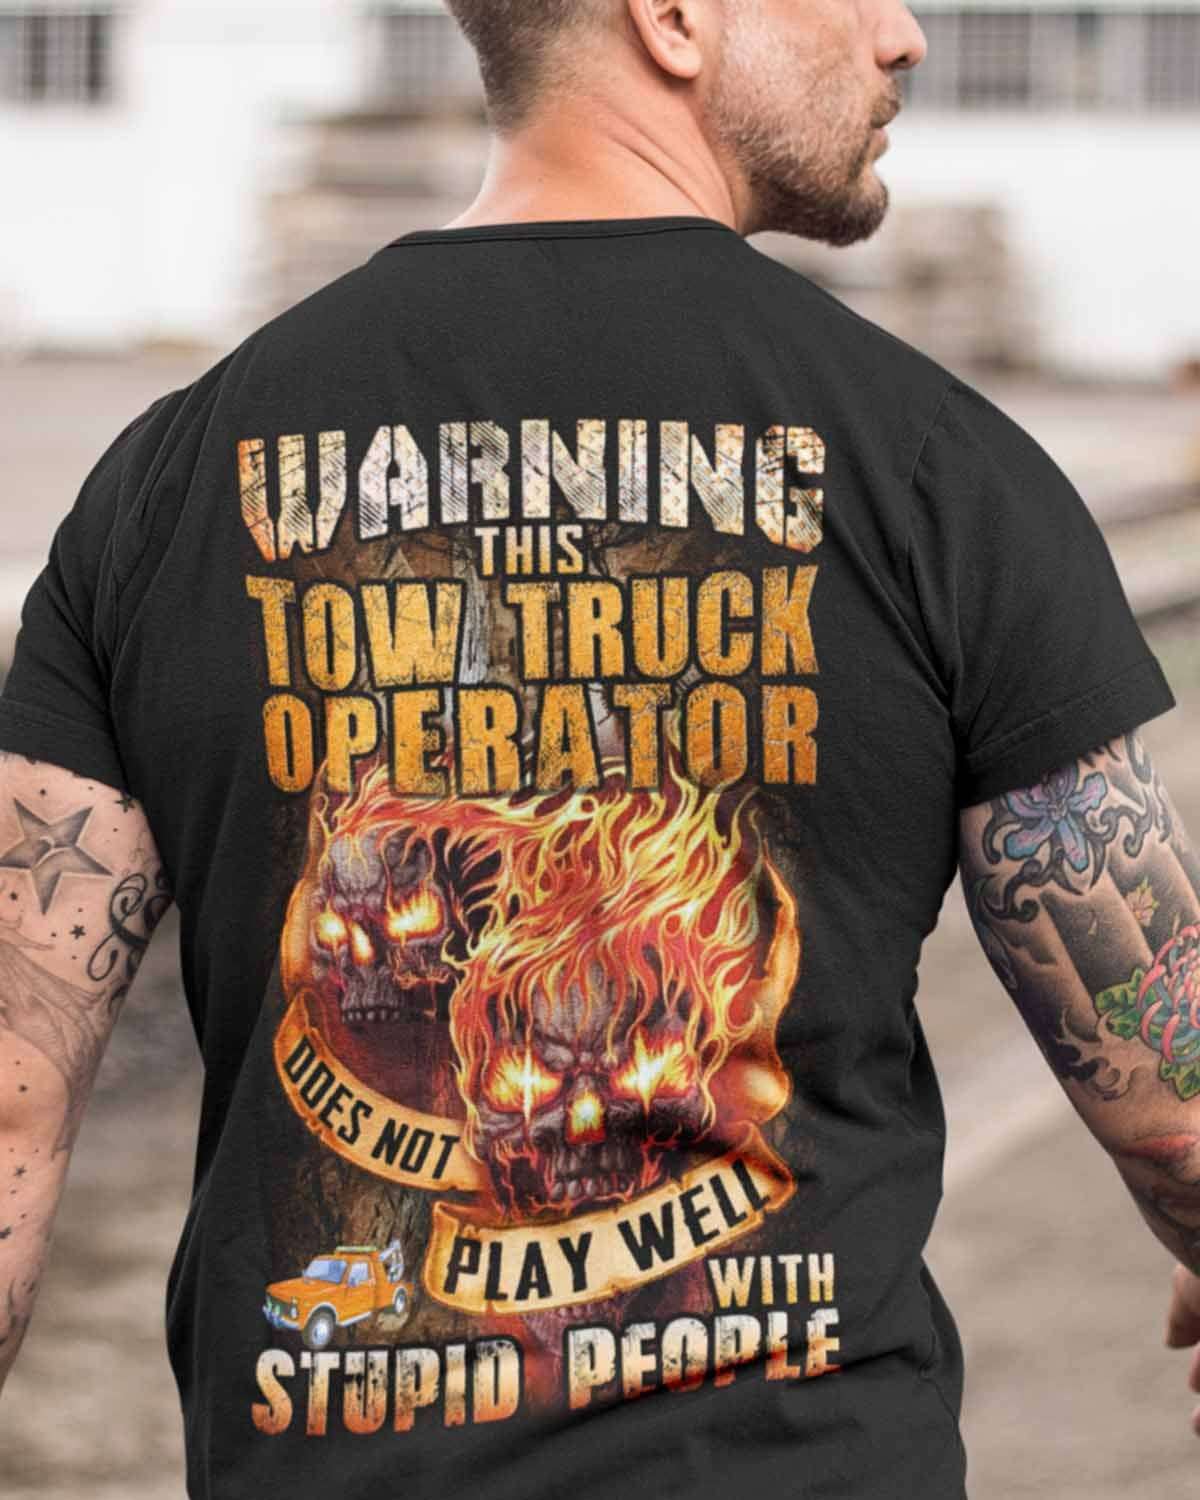 Warning this tow truck operator does not play well with stupid people - Flame tow truck operator